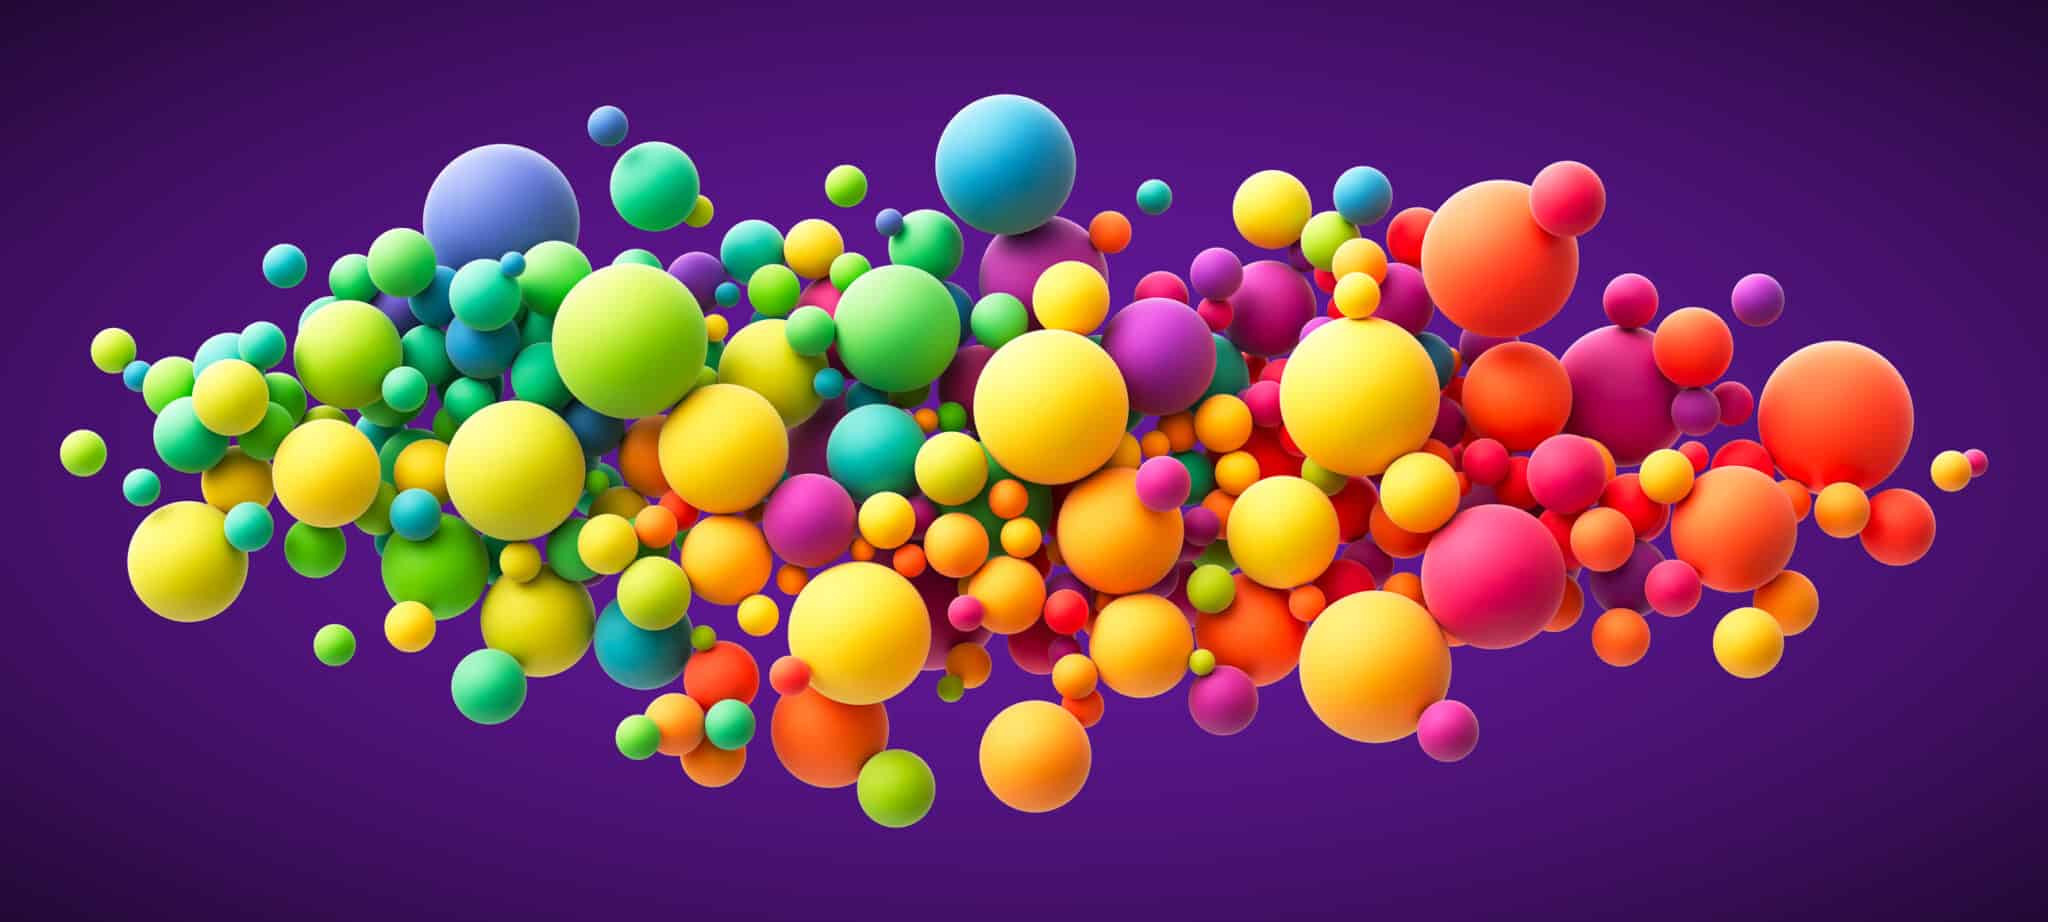 Colorful flying spheres background representing using color in marketing video for brand messaging